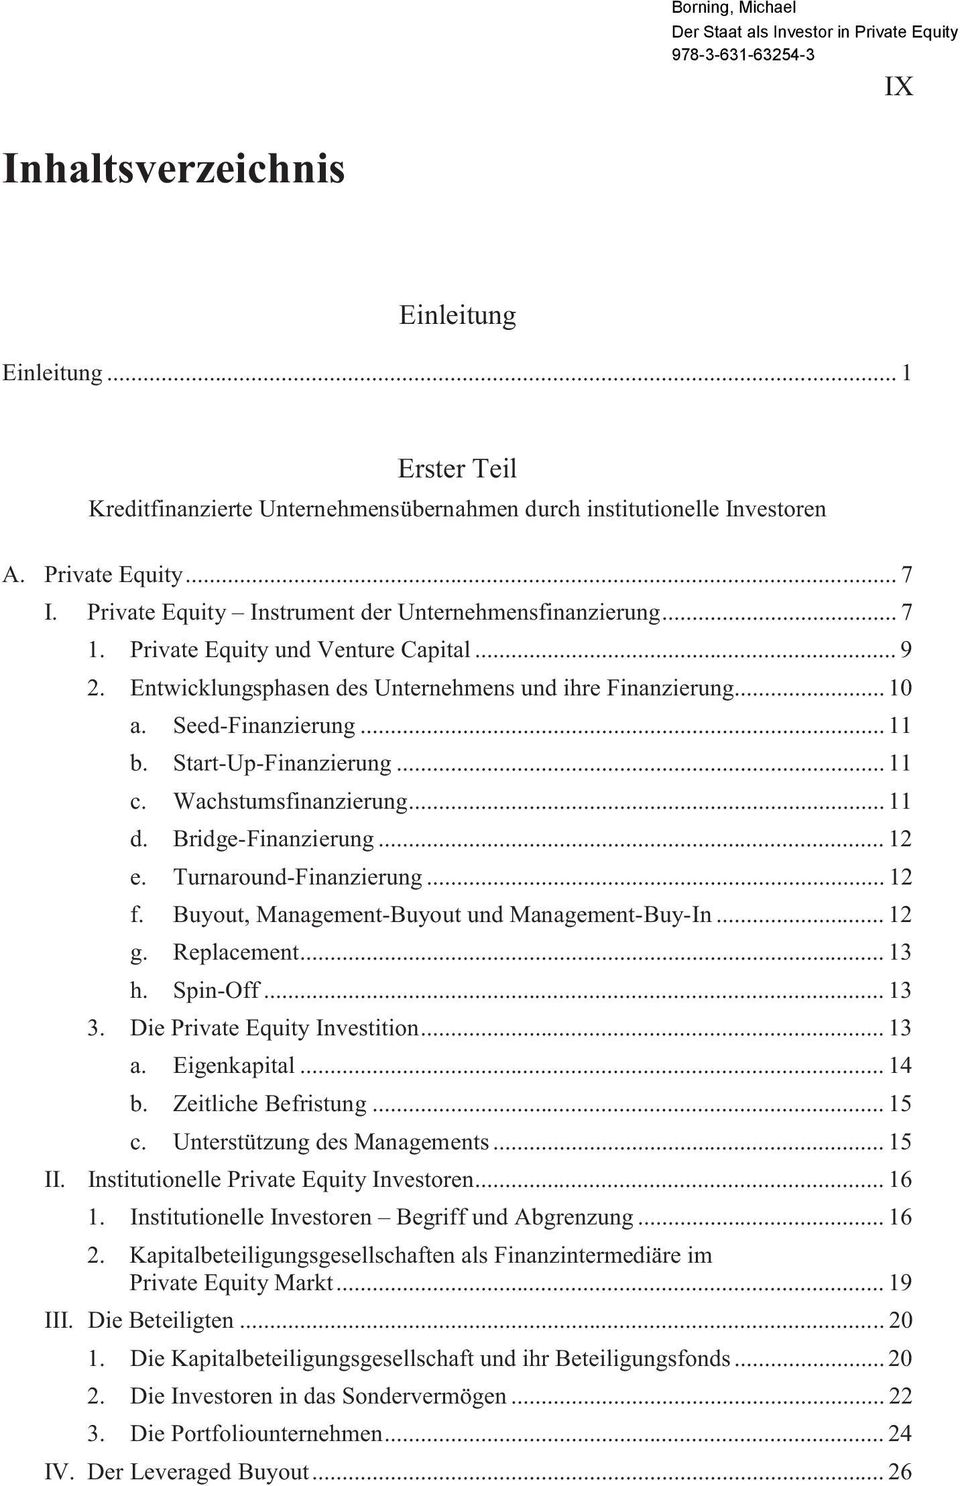 .. 11 d. Bridge-Finanzierung... 12 e. Turnaround-Finanzierung... 12 f. Buyout, Management-Buyout und Management-Buy-In... 12 g. Replacement... 13 h. Spin-Off... 13 3. Die Private Equity Investition.